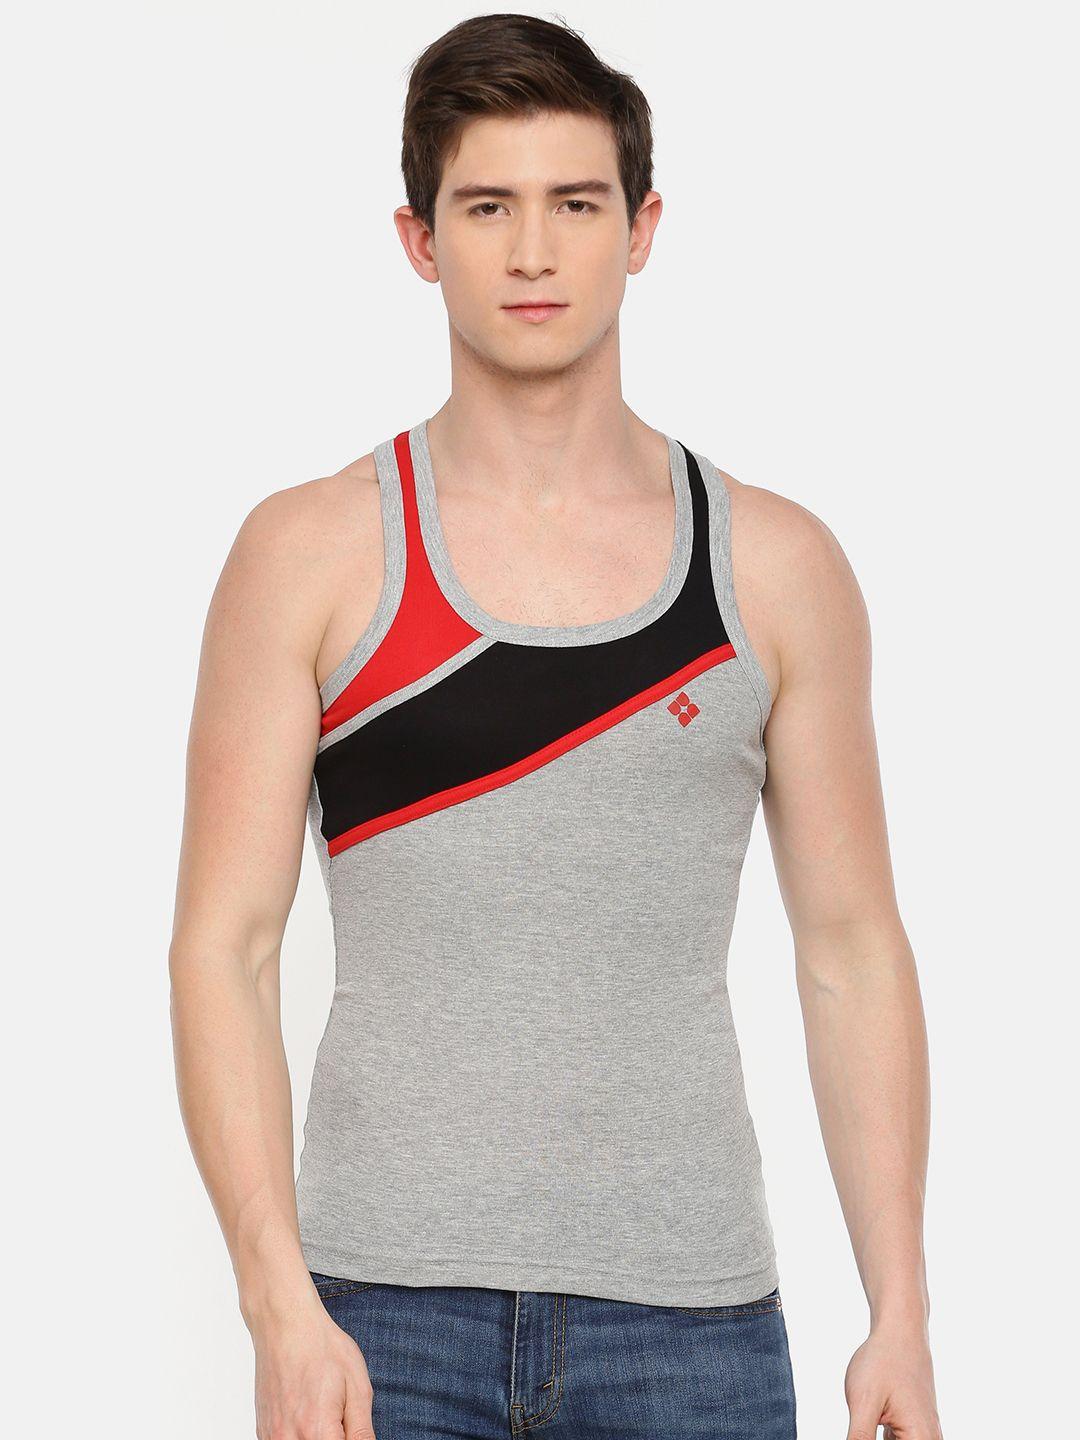 dollar bigboss assorted combed cotton racerback styled gym vest mbb-19-po1-co4-s24